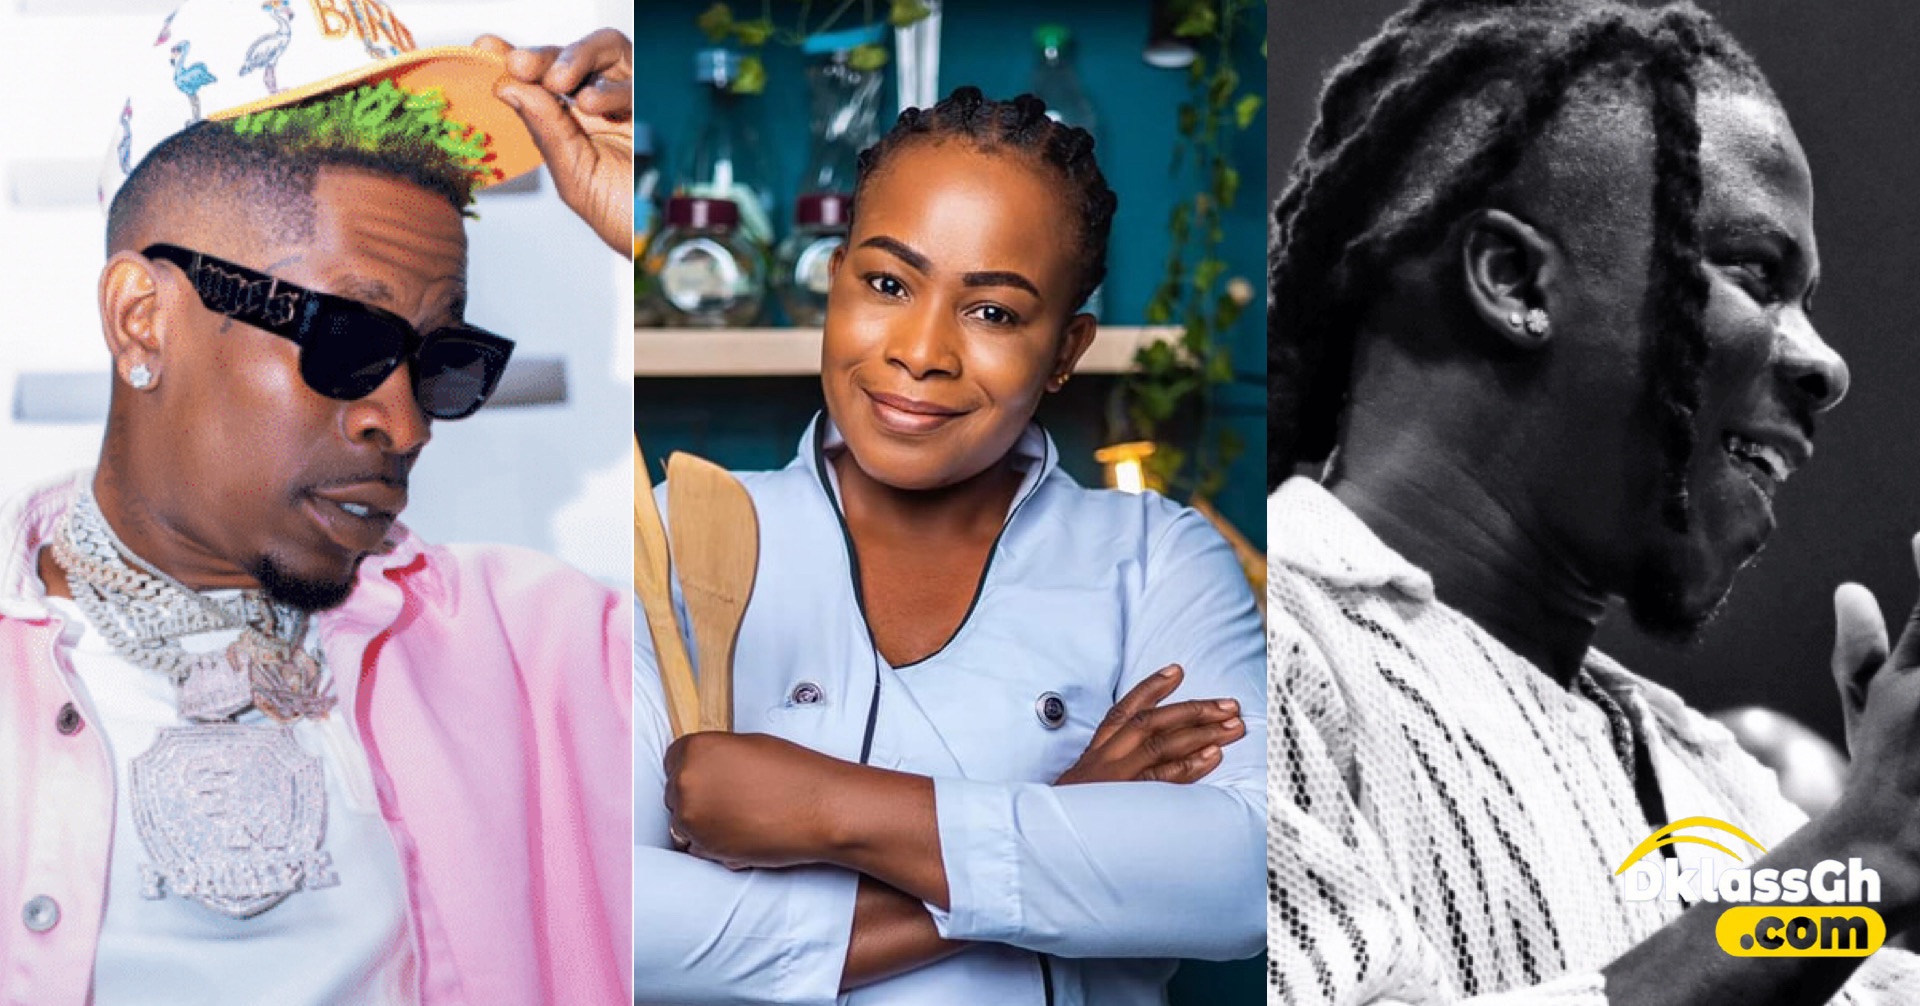 “I’m disappointed in them”; Chef Faila lashes out at Shatta Wale and Stonebwoy for not showing up at her cookathon (VIDEO)